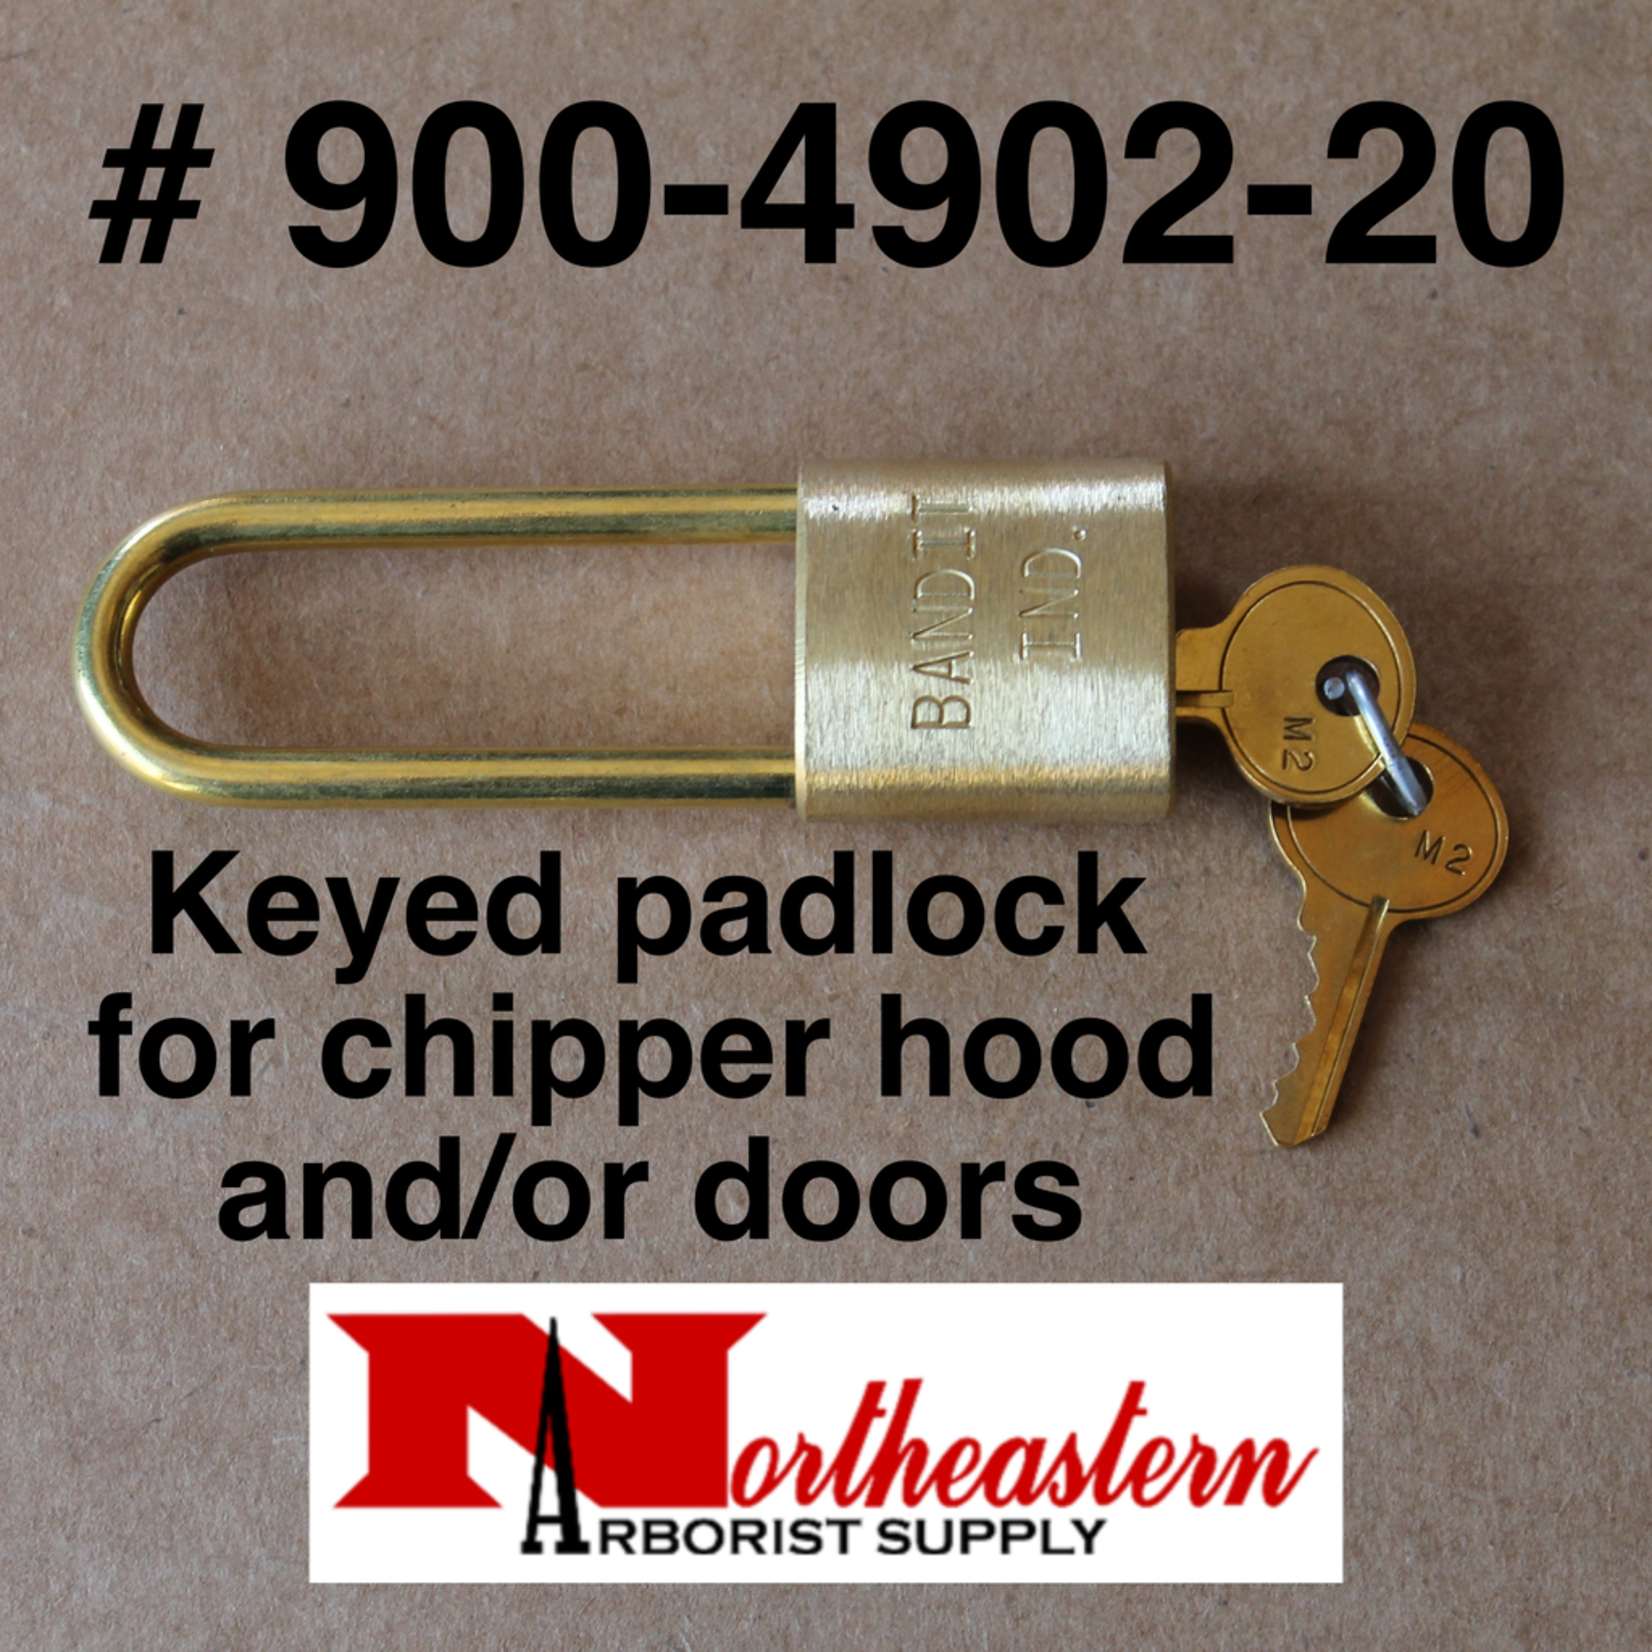 Padlock With Long Shackle Keyed to Secure The Chipper Hood and/or Doors